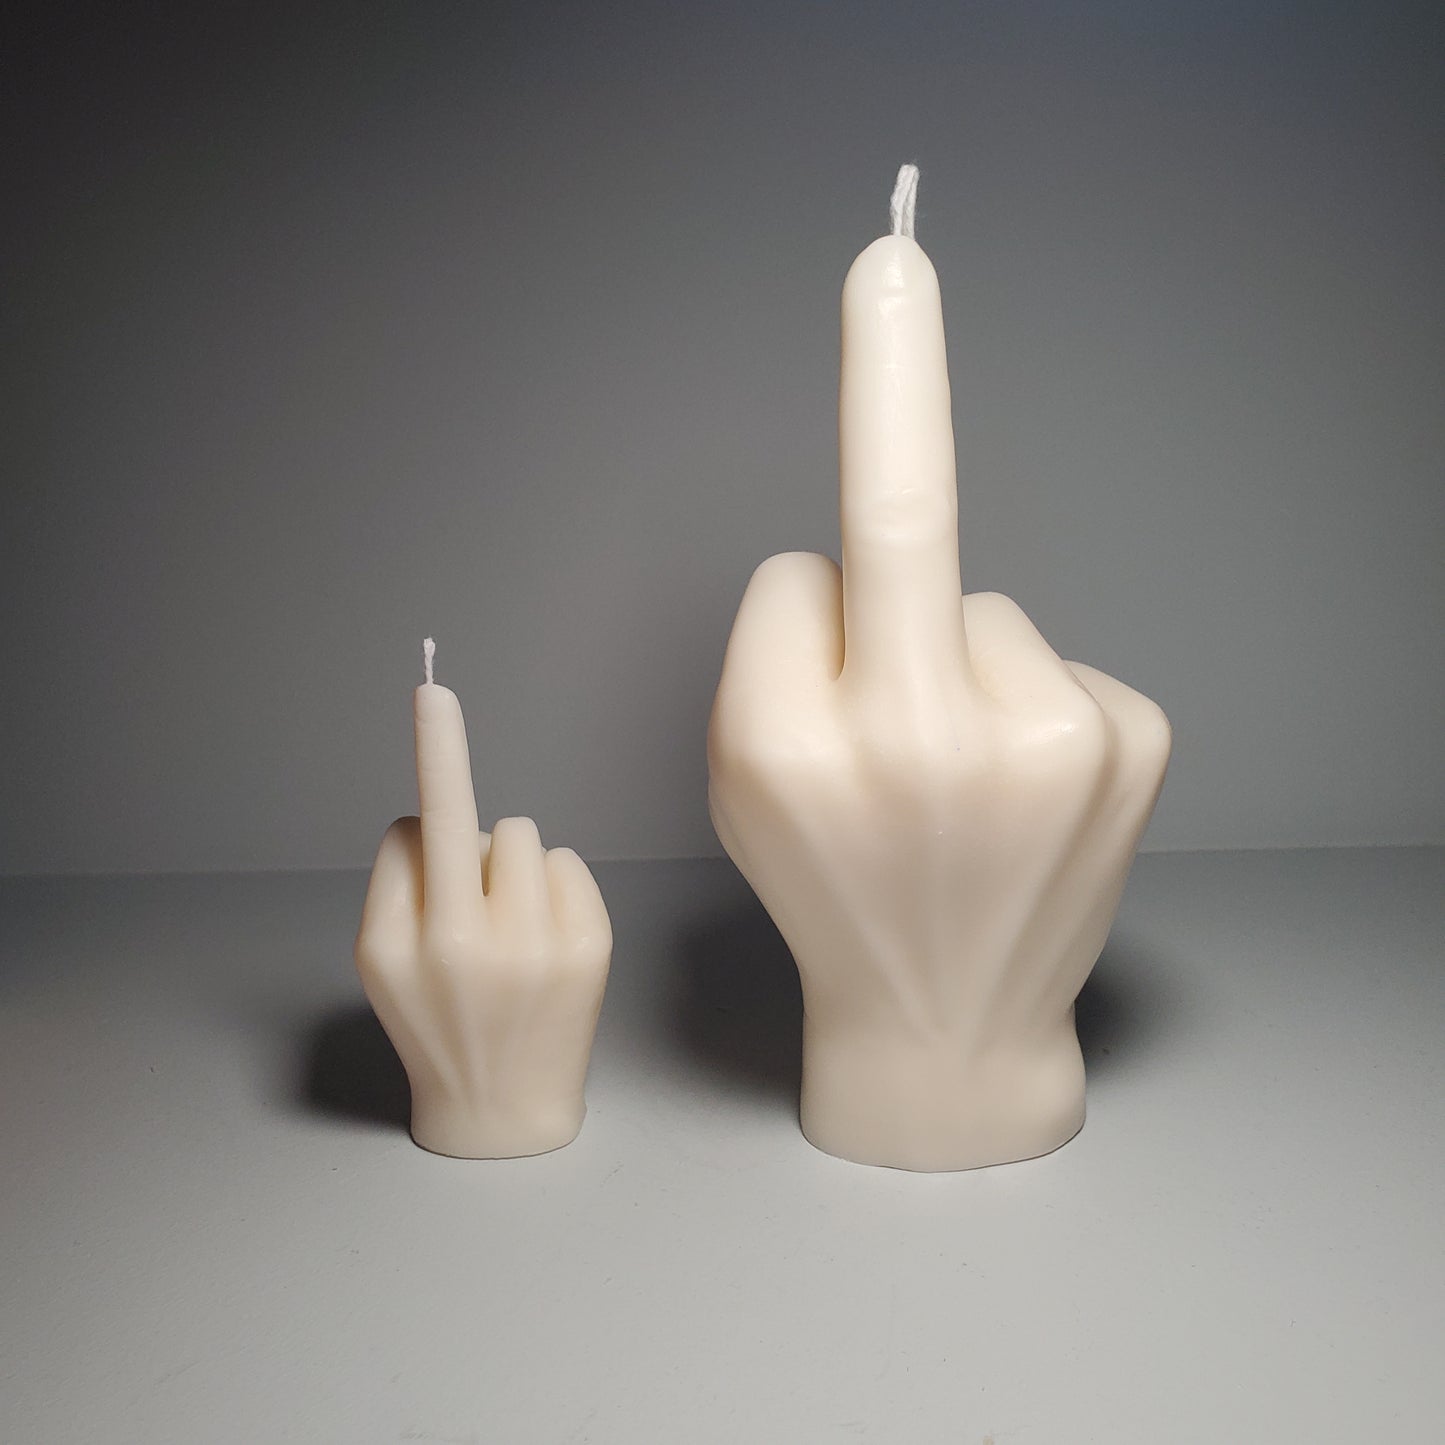 Giant middle finger candle – All4candle